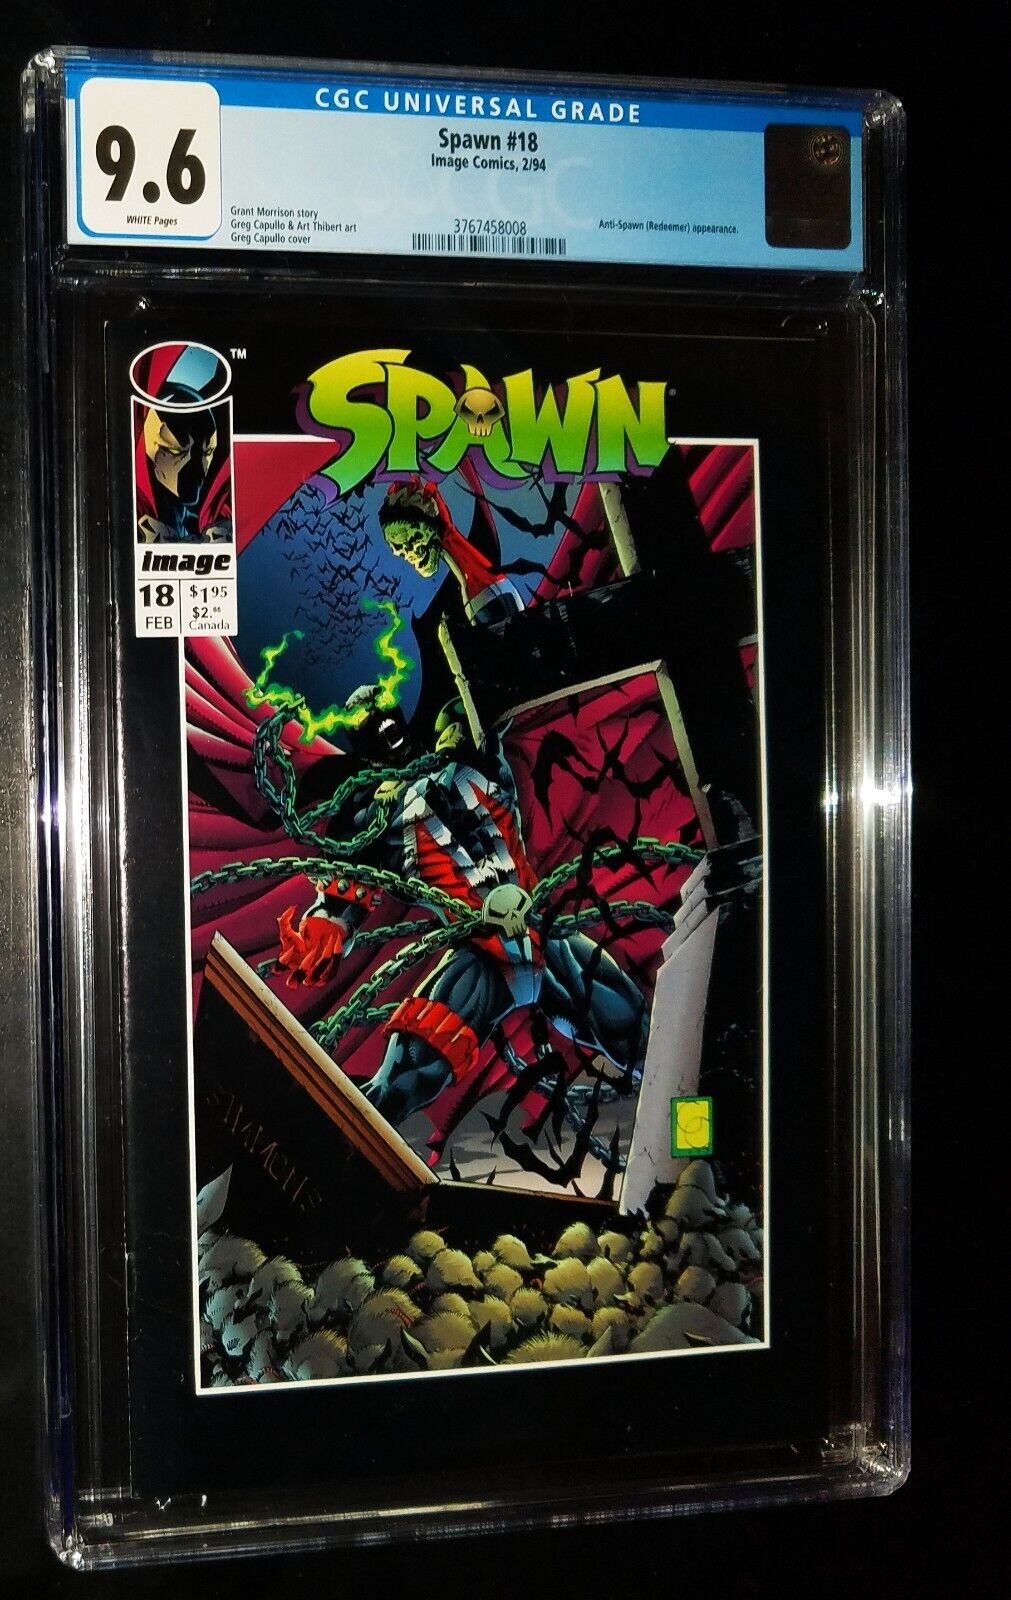 SPAWN CGC #18 1994 Image Comics CGC 9.6 NM+ White Pages KEY ISSUE 0626